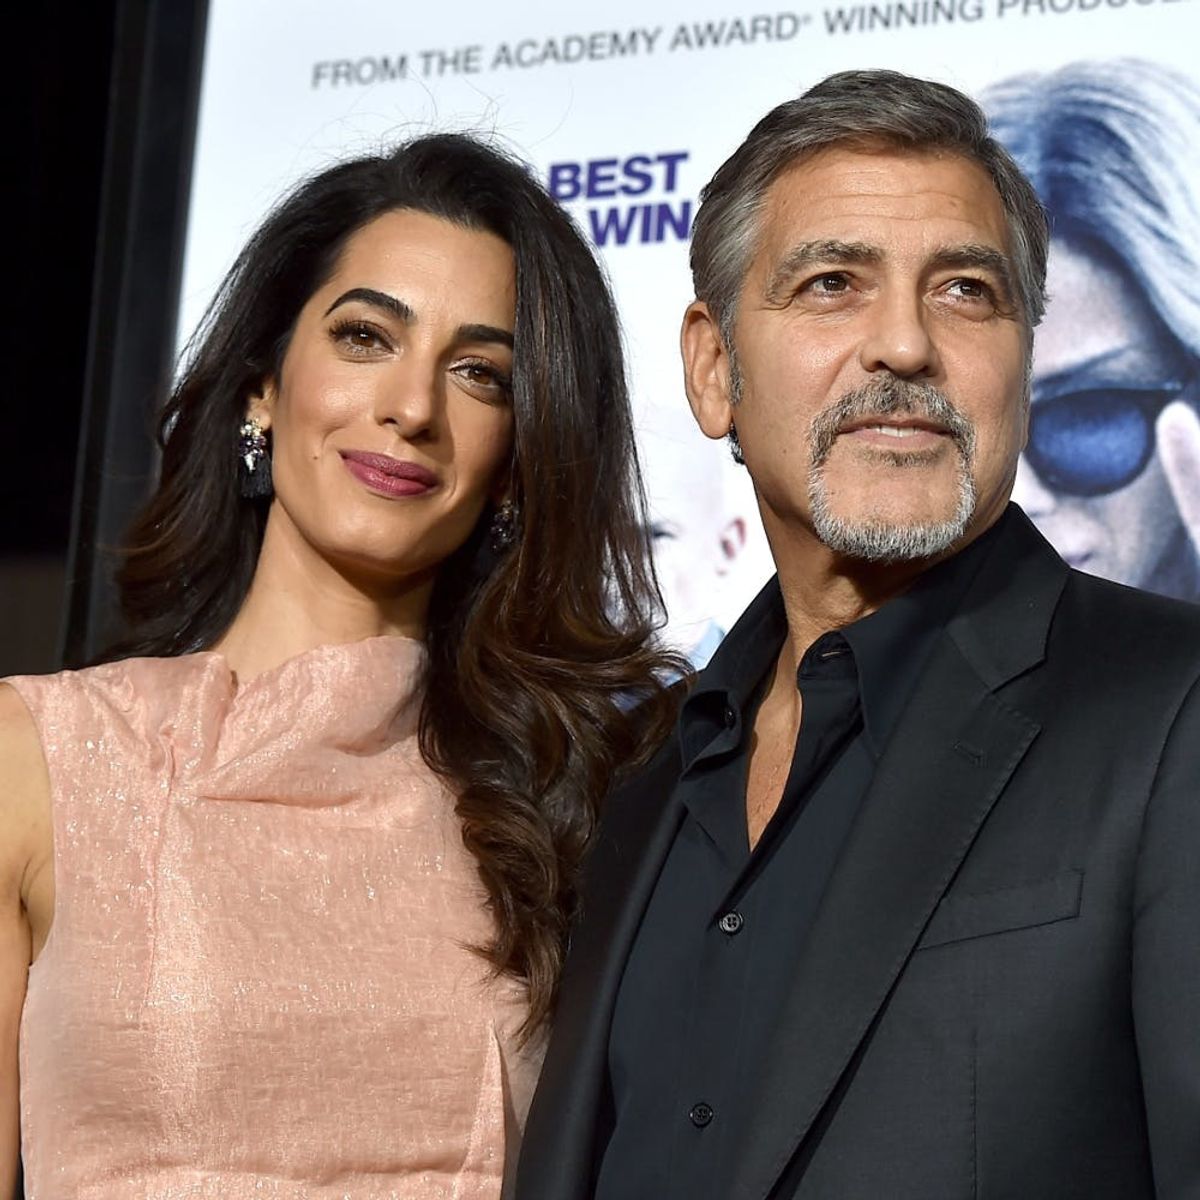 Amal Clooney’s Mom Says the New Parents Are “So Happy, So Contented” With the Twins